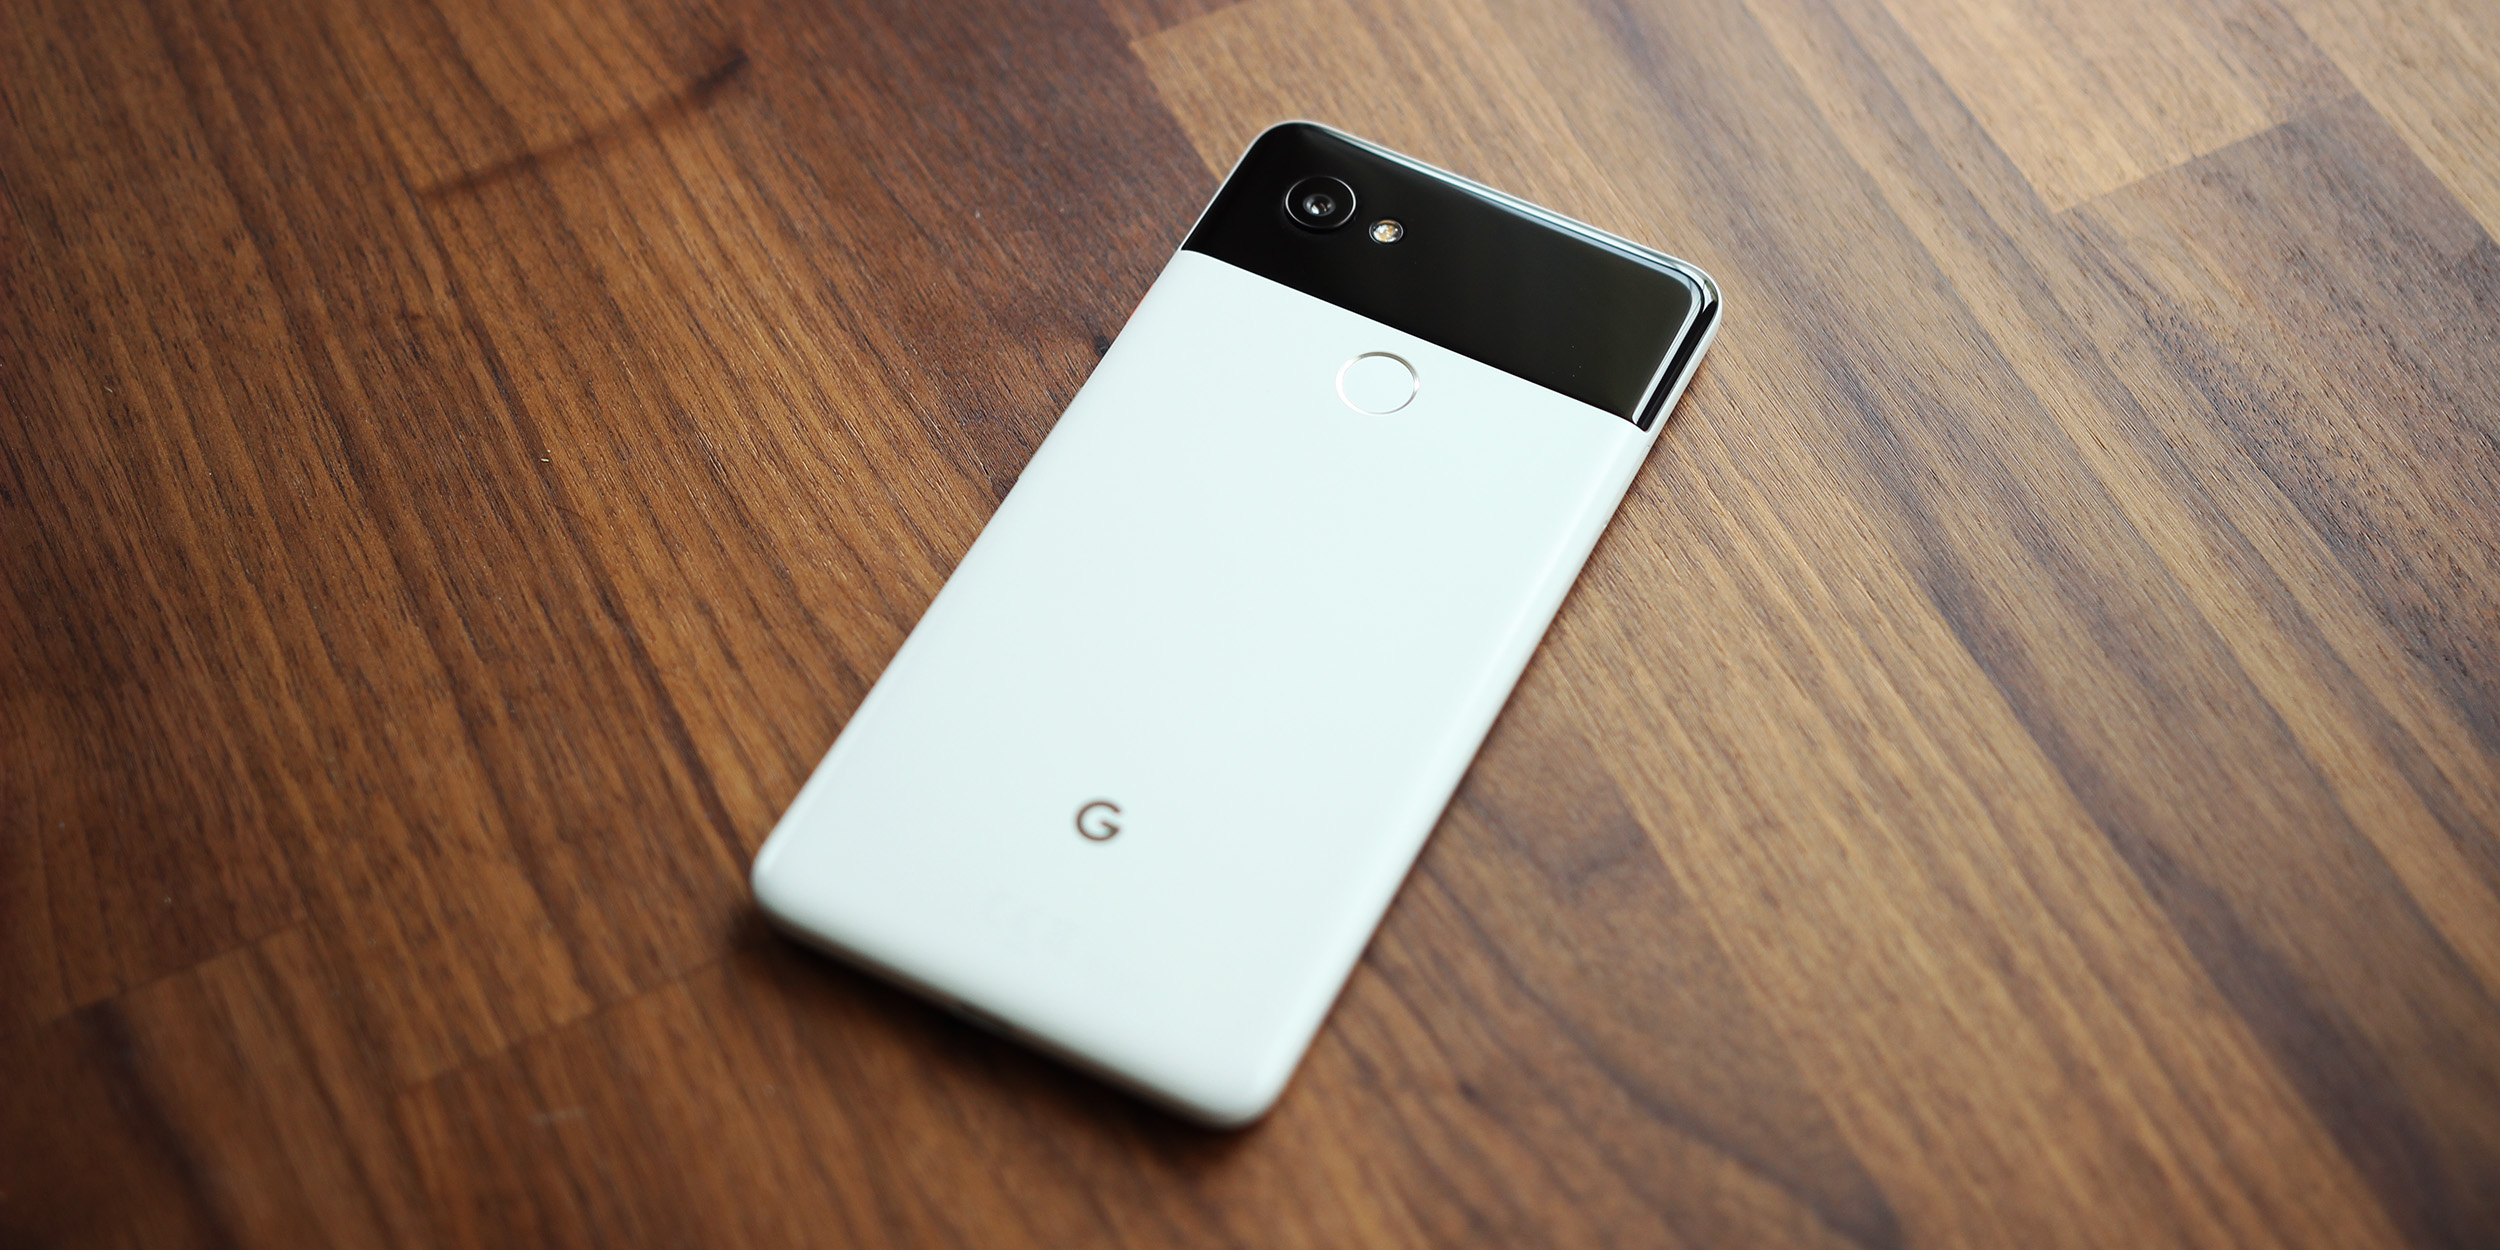 Google Pixel XL 2 Review: An Upgraded Android with a Spectacular